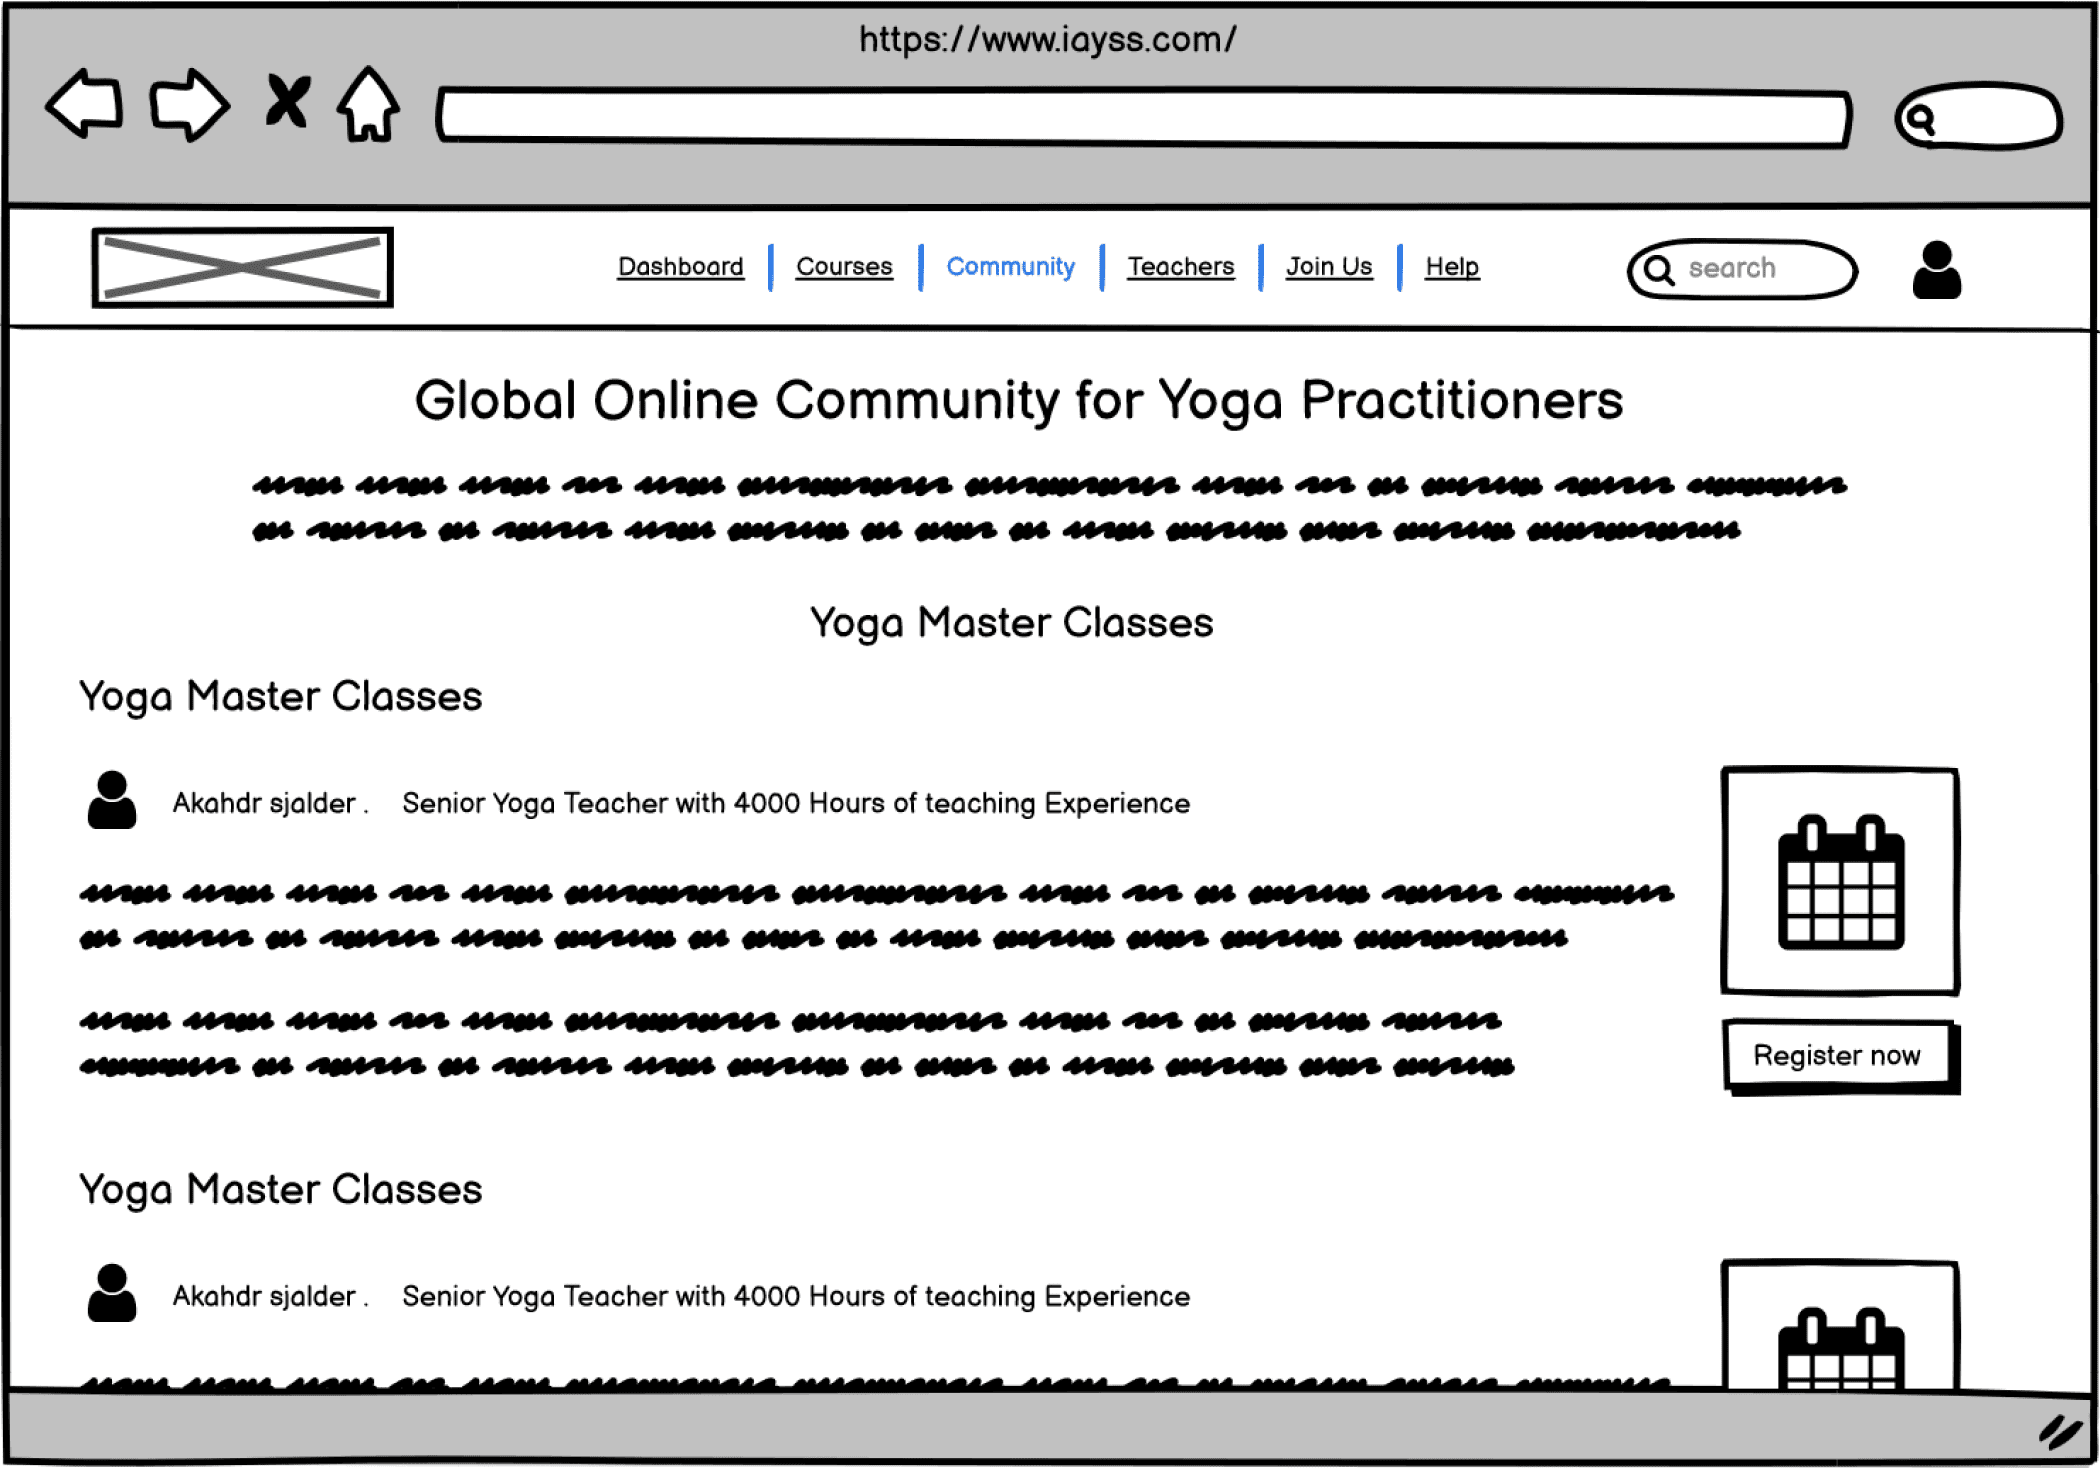 wireframe of community created using balsamiq software